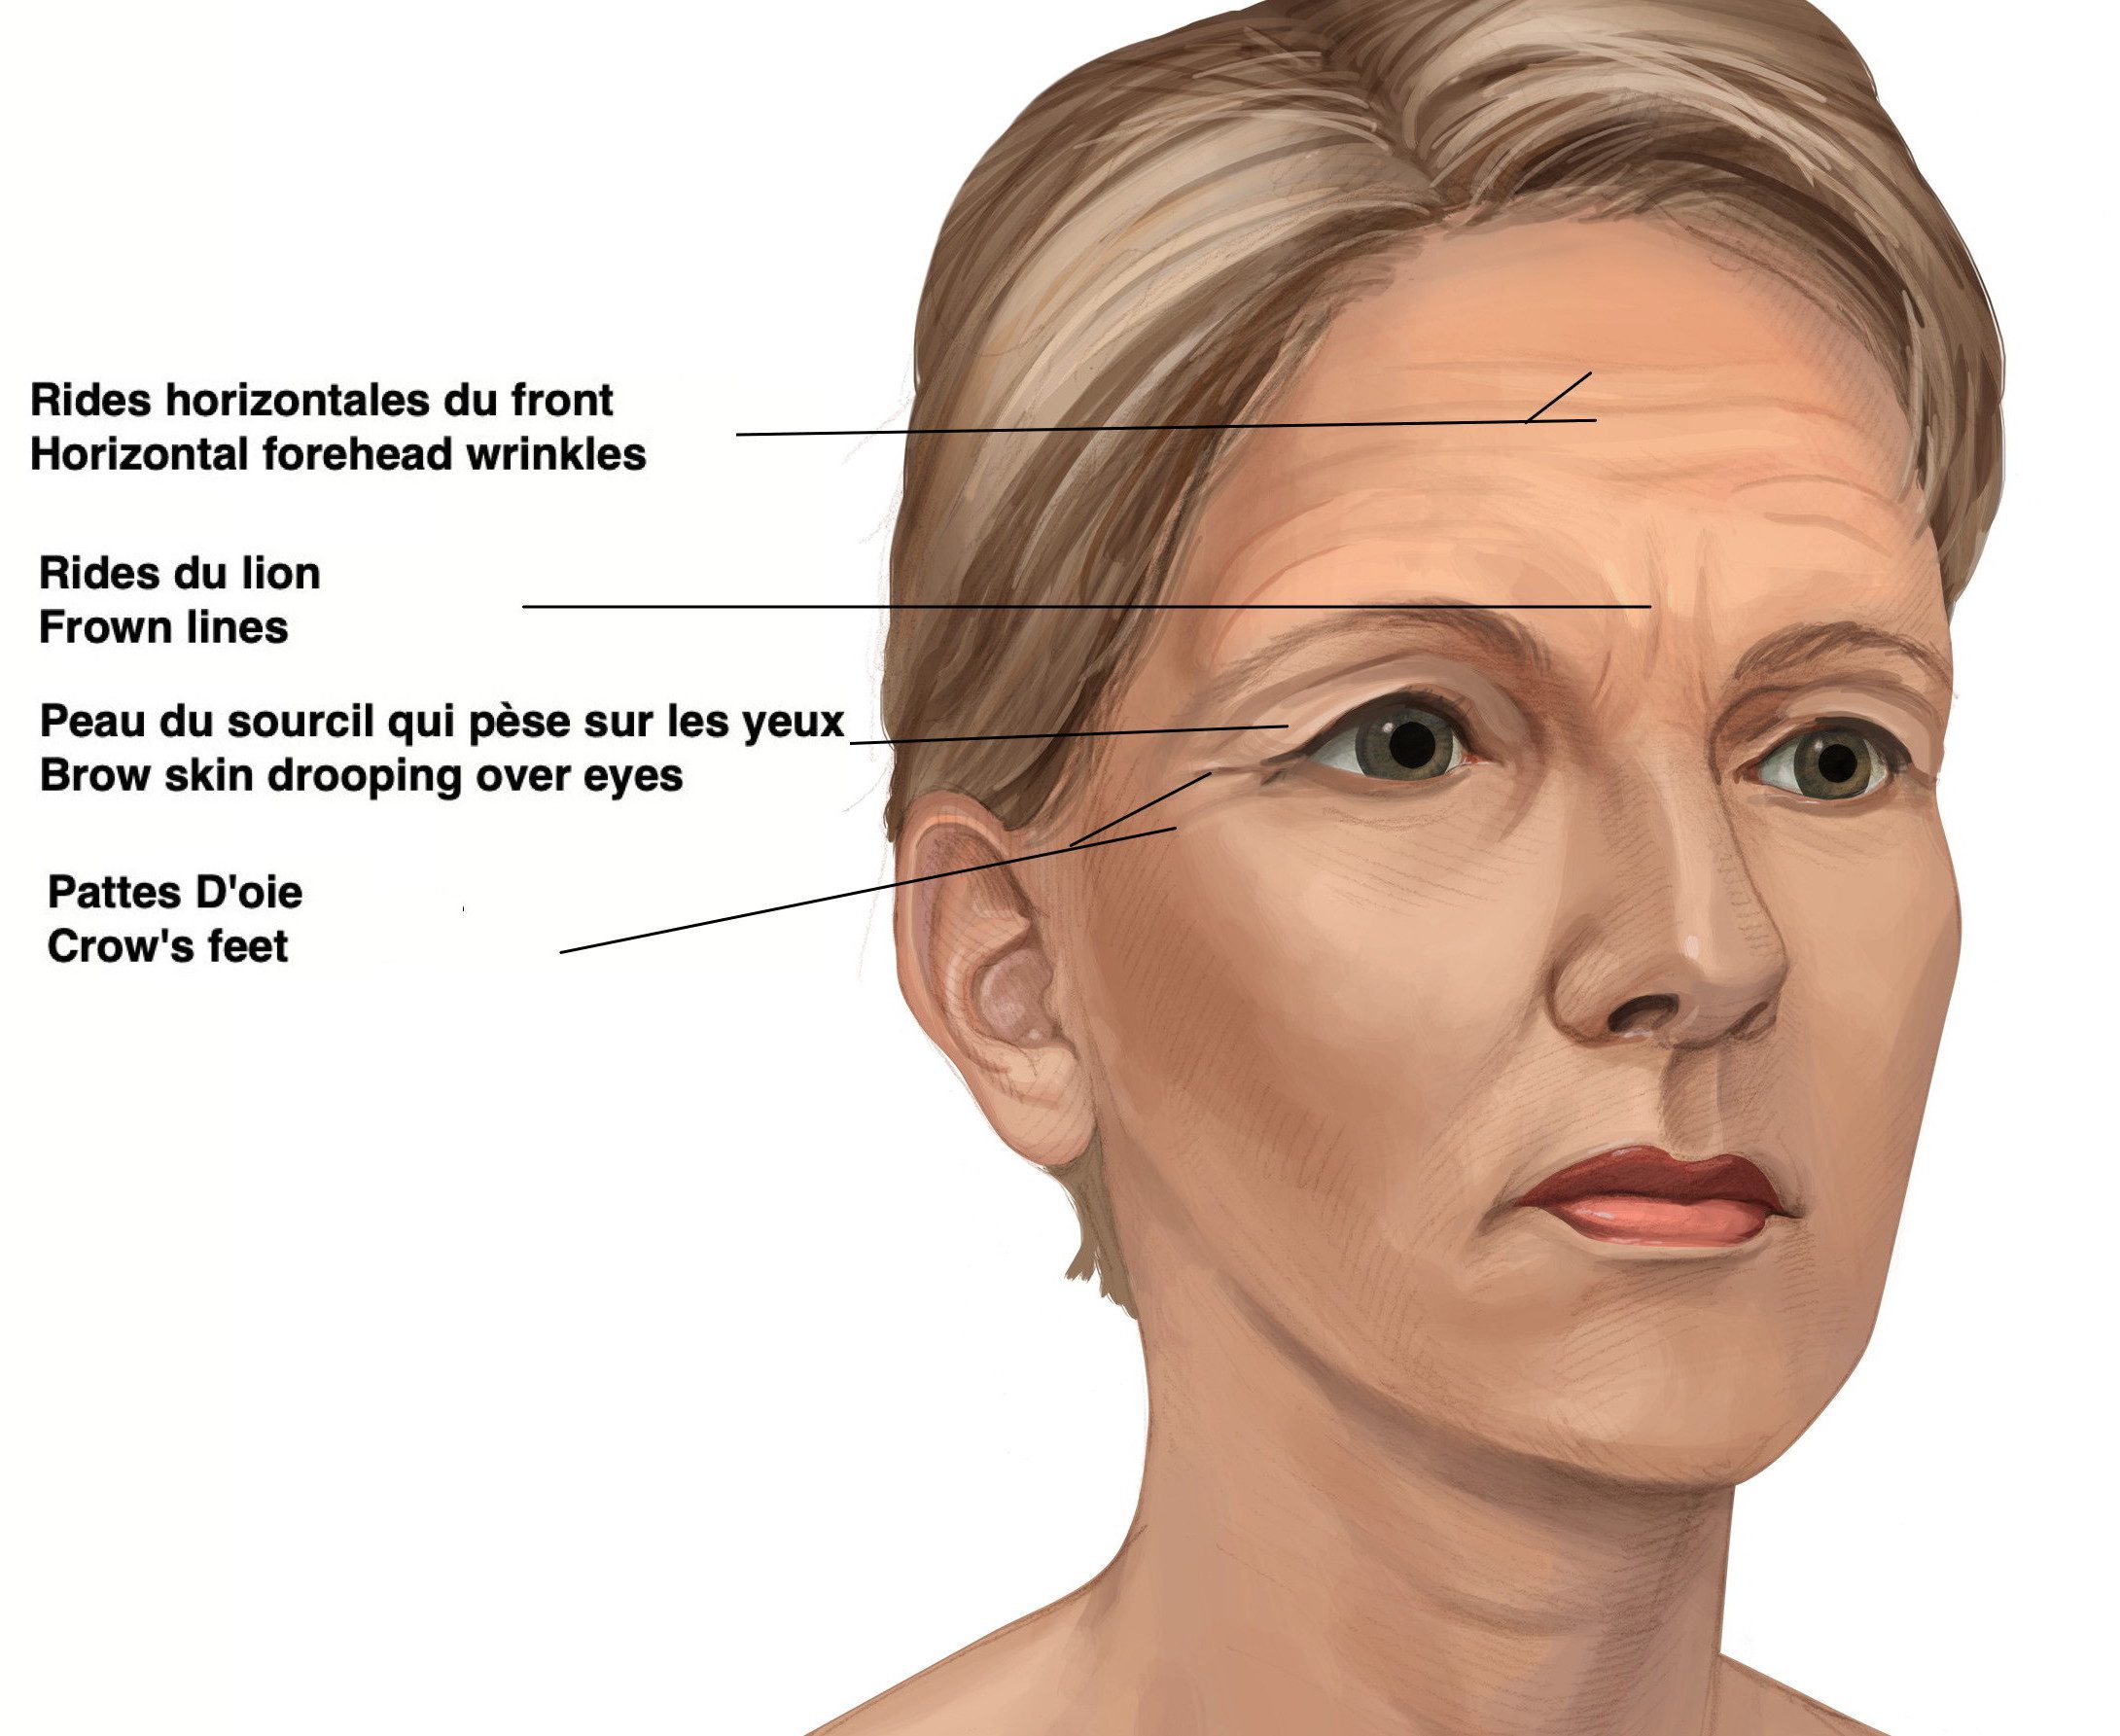 Figure 2 (a): Older woman with aging changes to the brow. The arch of the brow is lost. It is more horizontal, positioned lower at the bone of the eye socket. The excess skin droops over the eyes and there are wrinkles in the forehead.